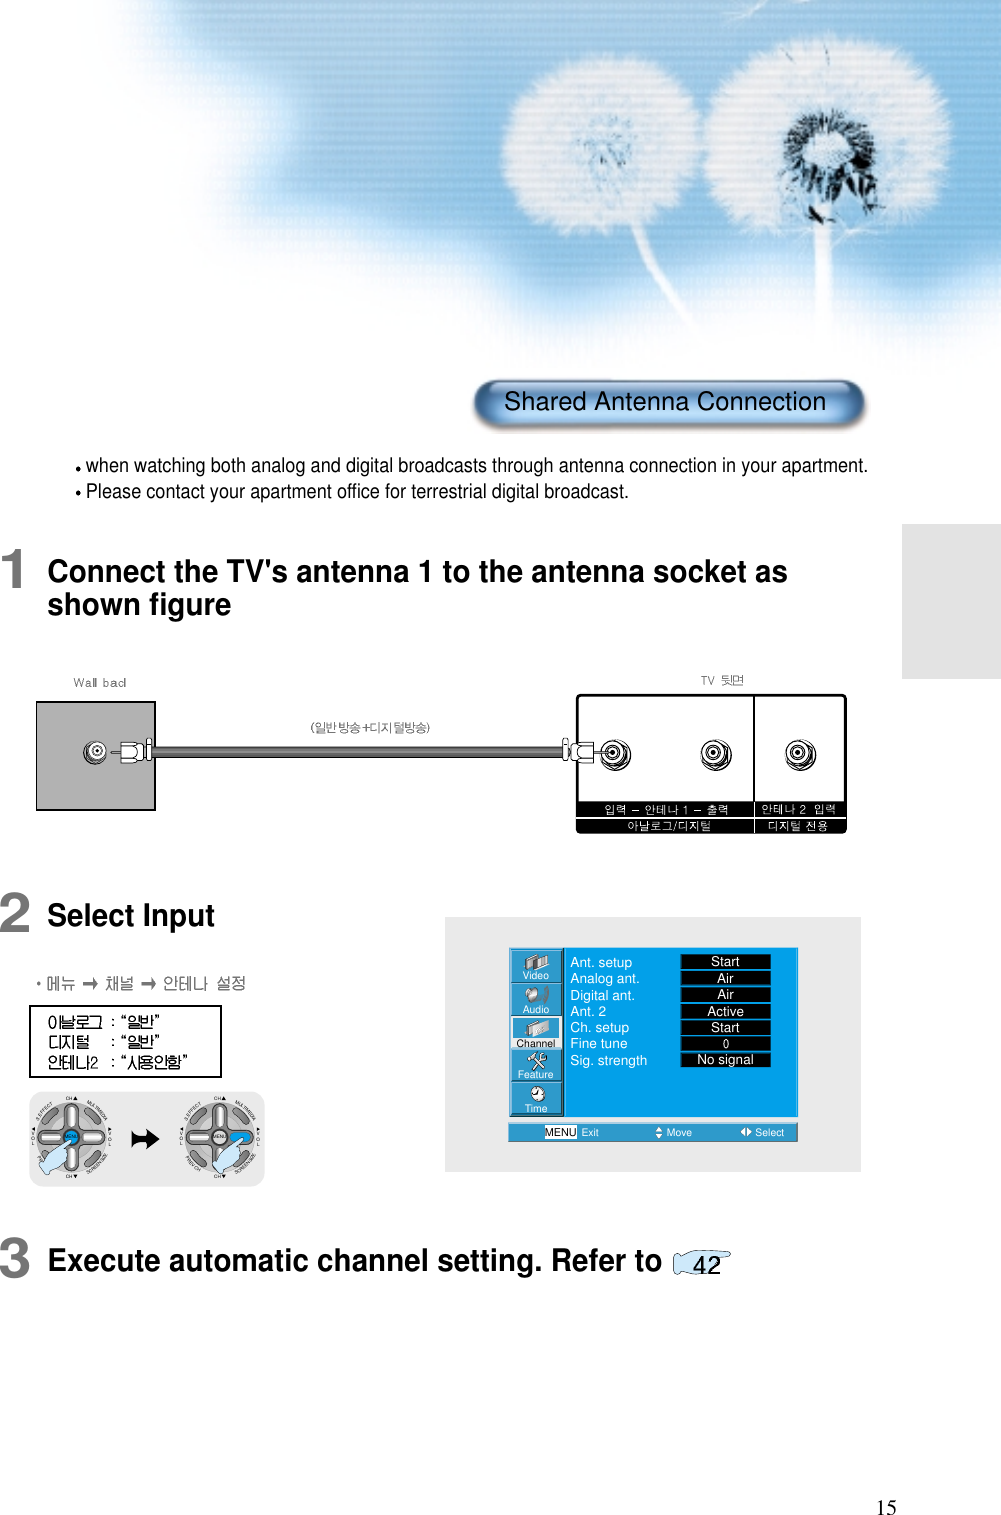 151Connect the TV&apos;s antenna 1 to the antenna socket asshown ﬁgureVideoChannelMENUAudioFeatureTimeExit Move SelectAnt. setupAnalog ant.Digital ant.Ant. 2Ch. setupFine tuneSig. strengthStartAirAirActiveStartNo signal2Select Inputwhen watching both analog and digital broadcasts through antenna connection in your apartment.Please contact your apartment ofﬁce for terrestrial digital broadcast.CHCHVOLVOLMULTIMEDIAS.EFFECTMENUPREVCHSCREENSIZECHCHVOLVOLMULTIMEDIAS.EFFECTMENUPREVCHSCREENSIZEShared Antenna Connection3Execute automatic channel setting. Refer to 